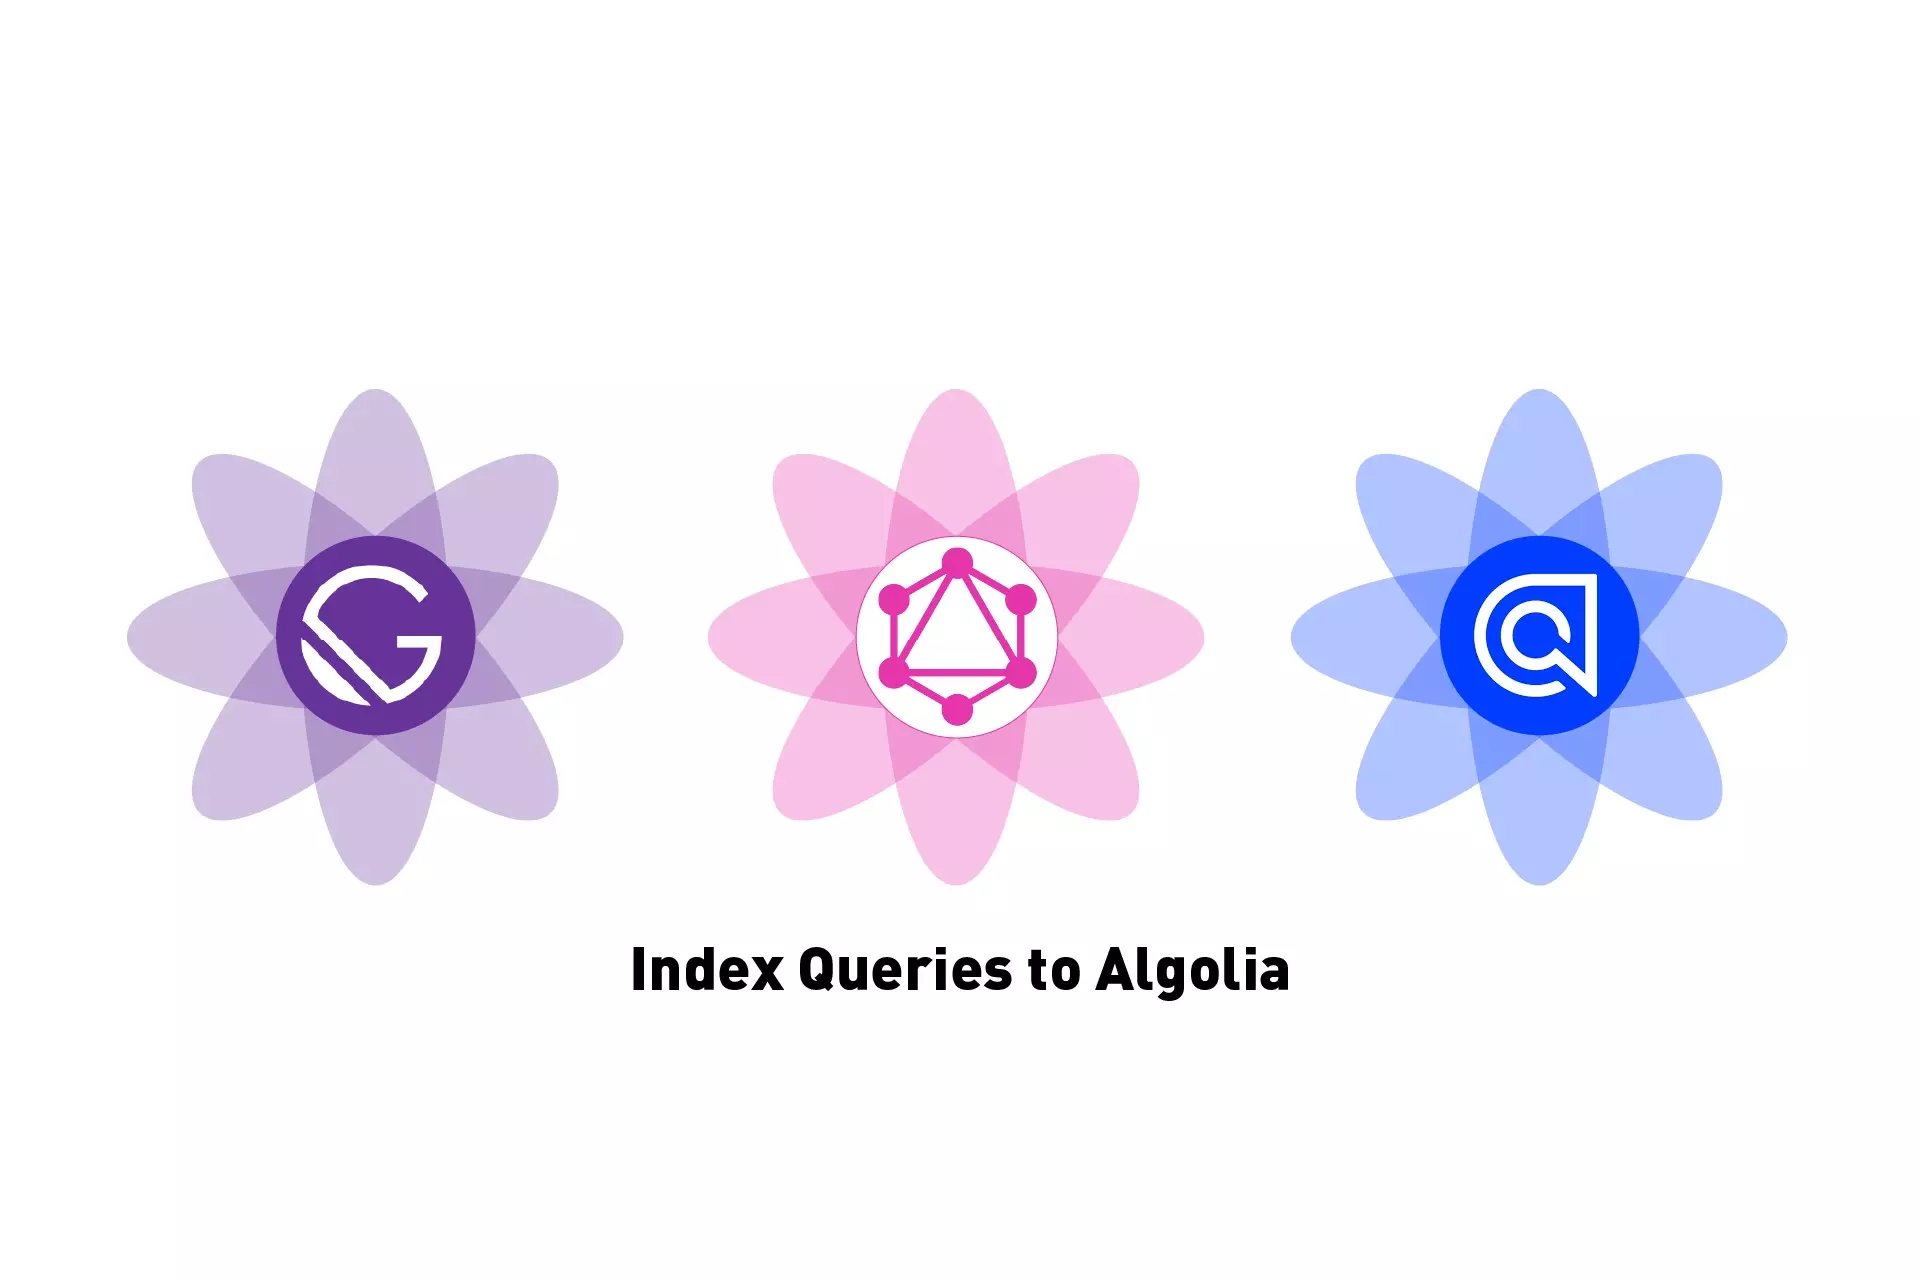 Three flowers that represent GatsbyJS, GraphQL and Algolia. Beneath it sits the text "Index Queries to Algolia."